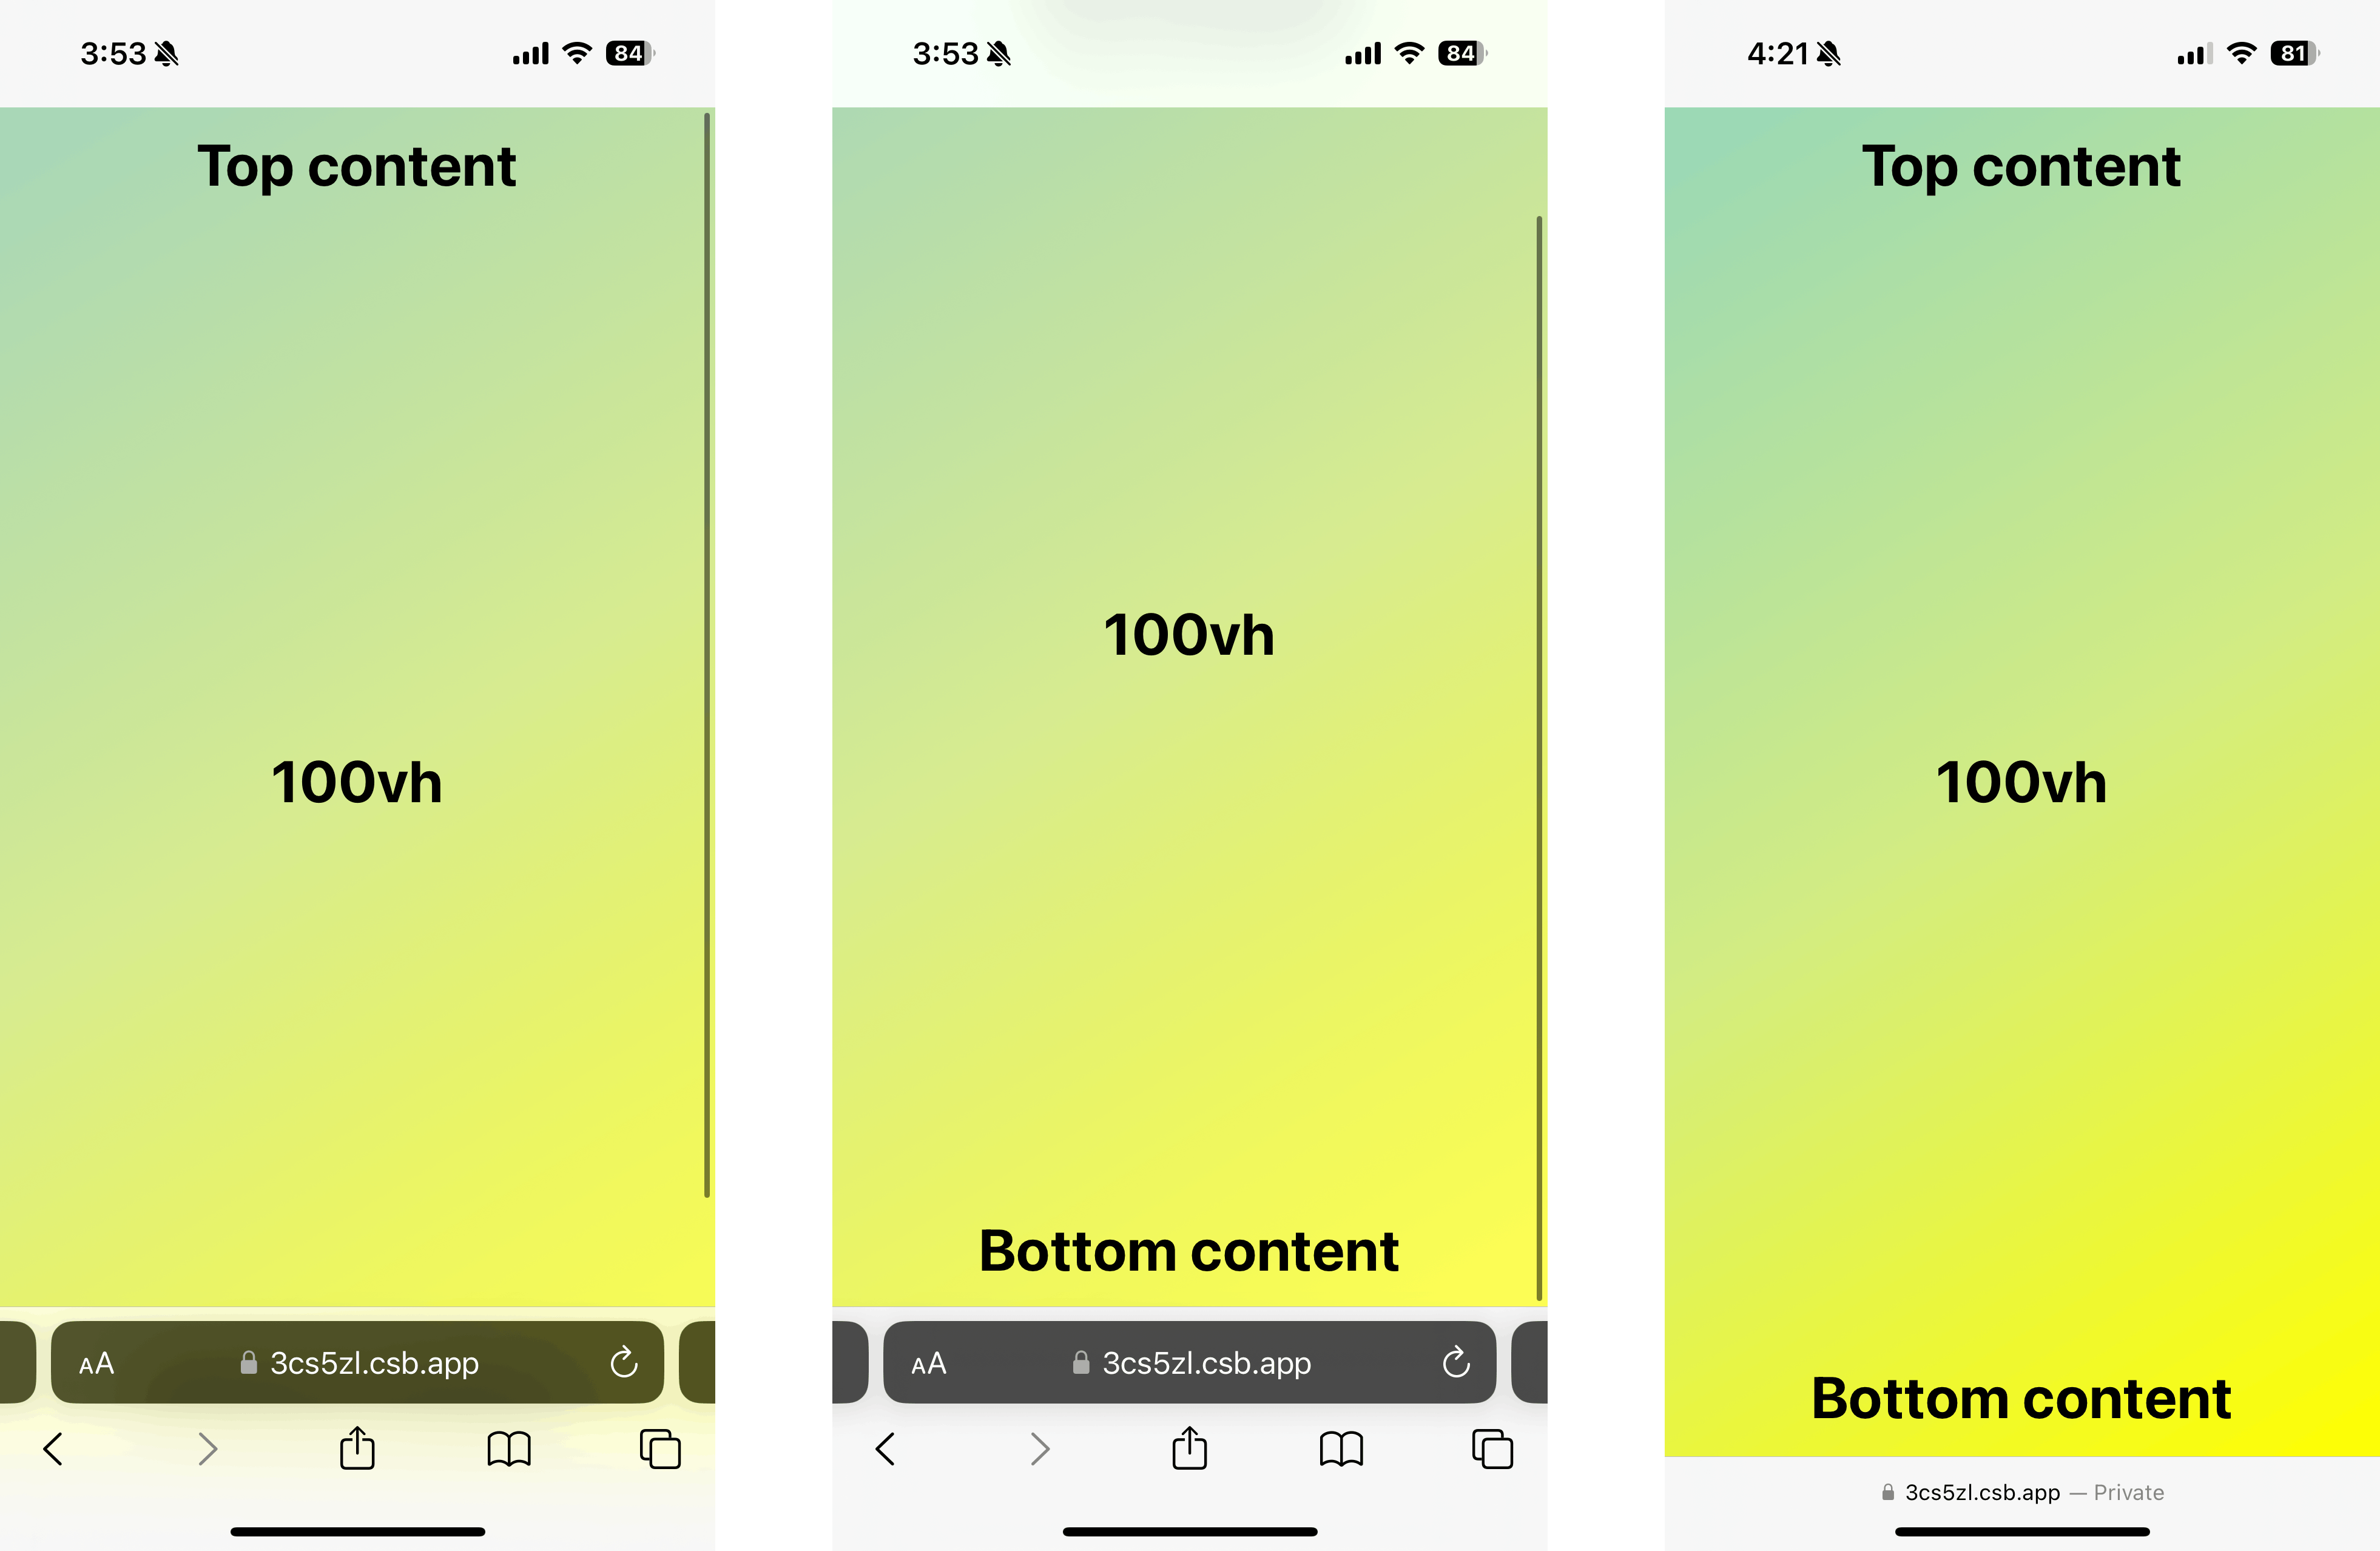 100vh on iOS Safari adds a scroll bar and cuts off bottom content